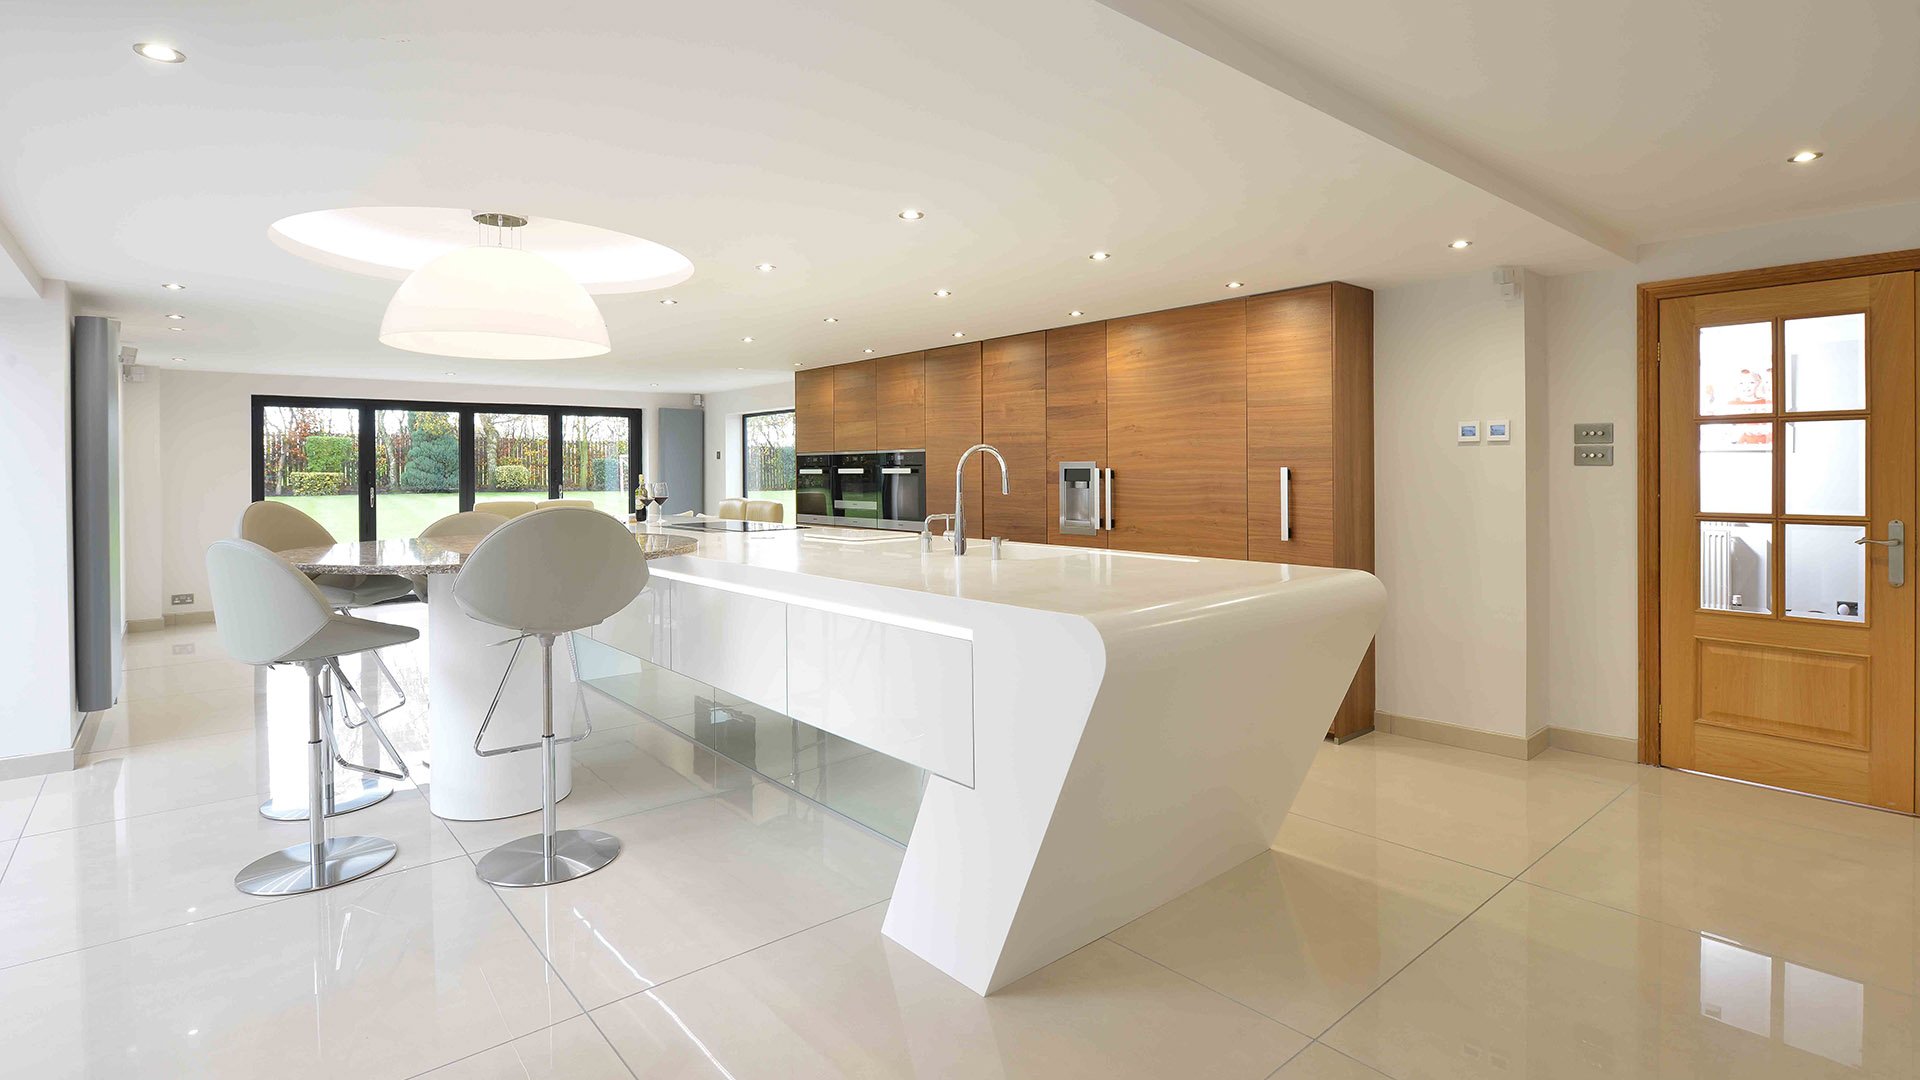 USES OF CORIAN IN THE HOUSE